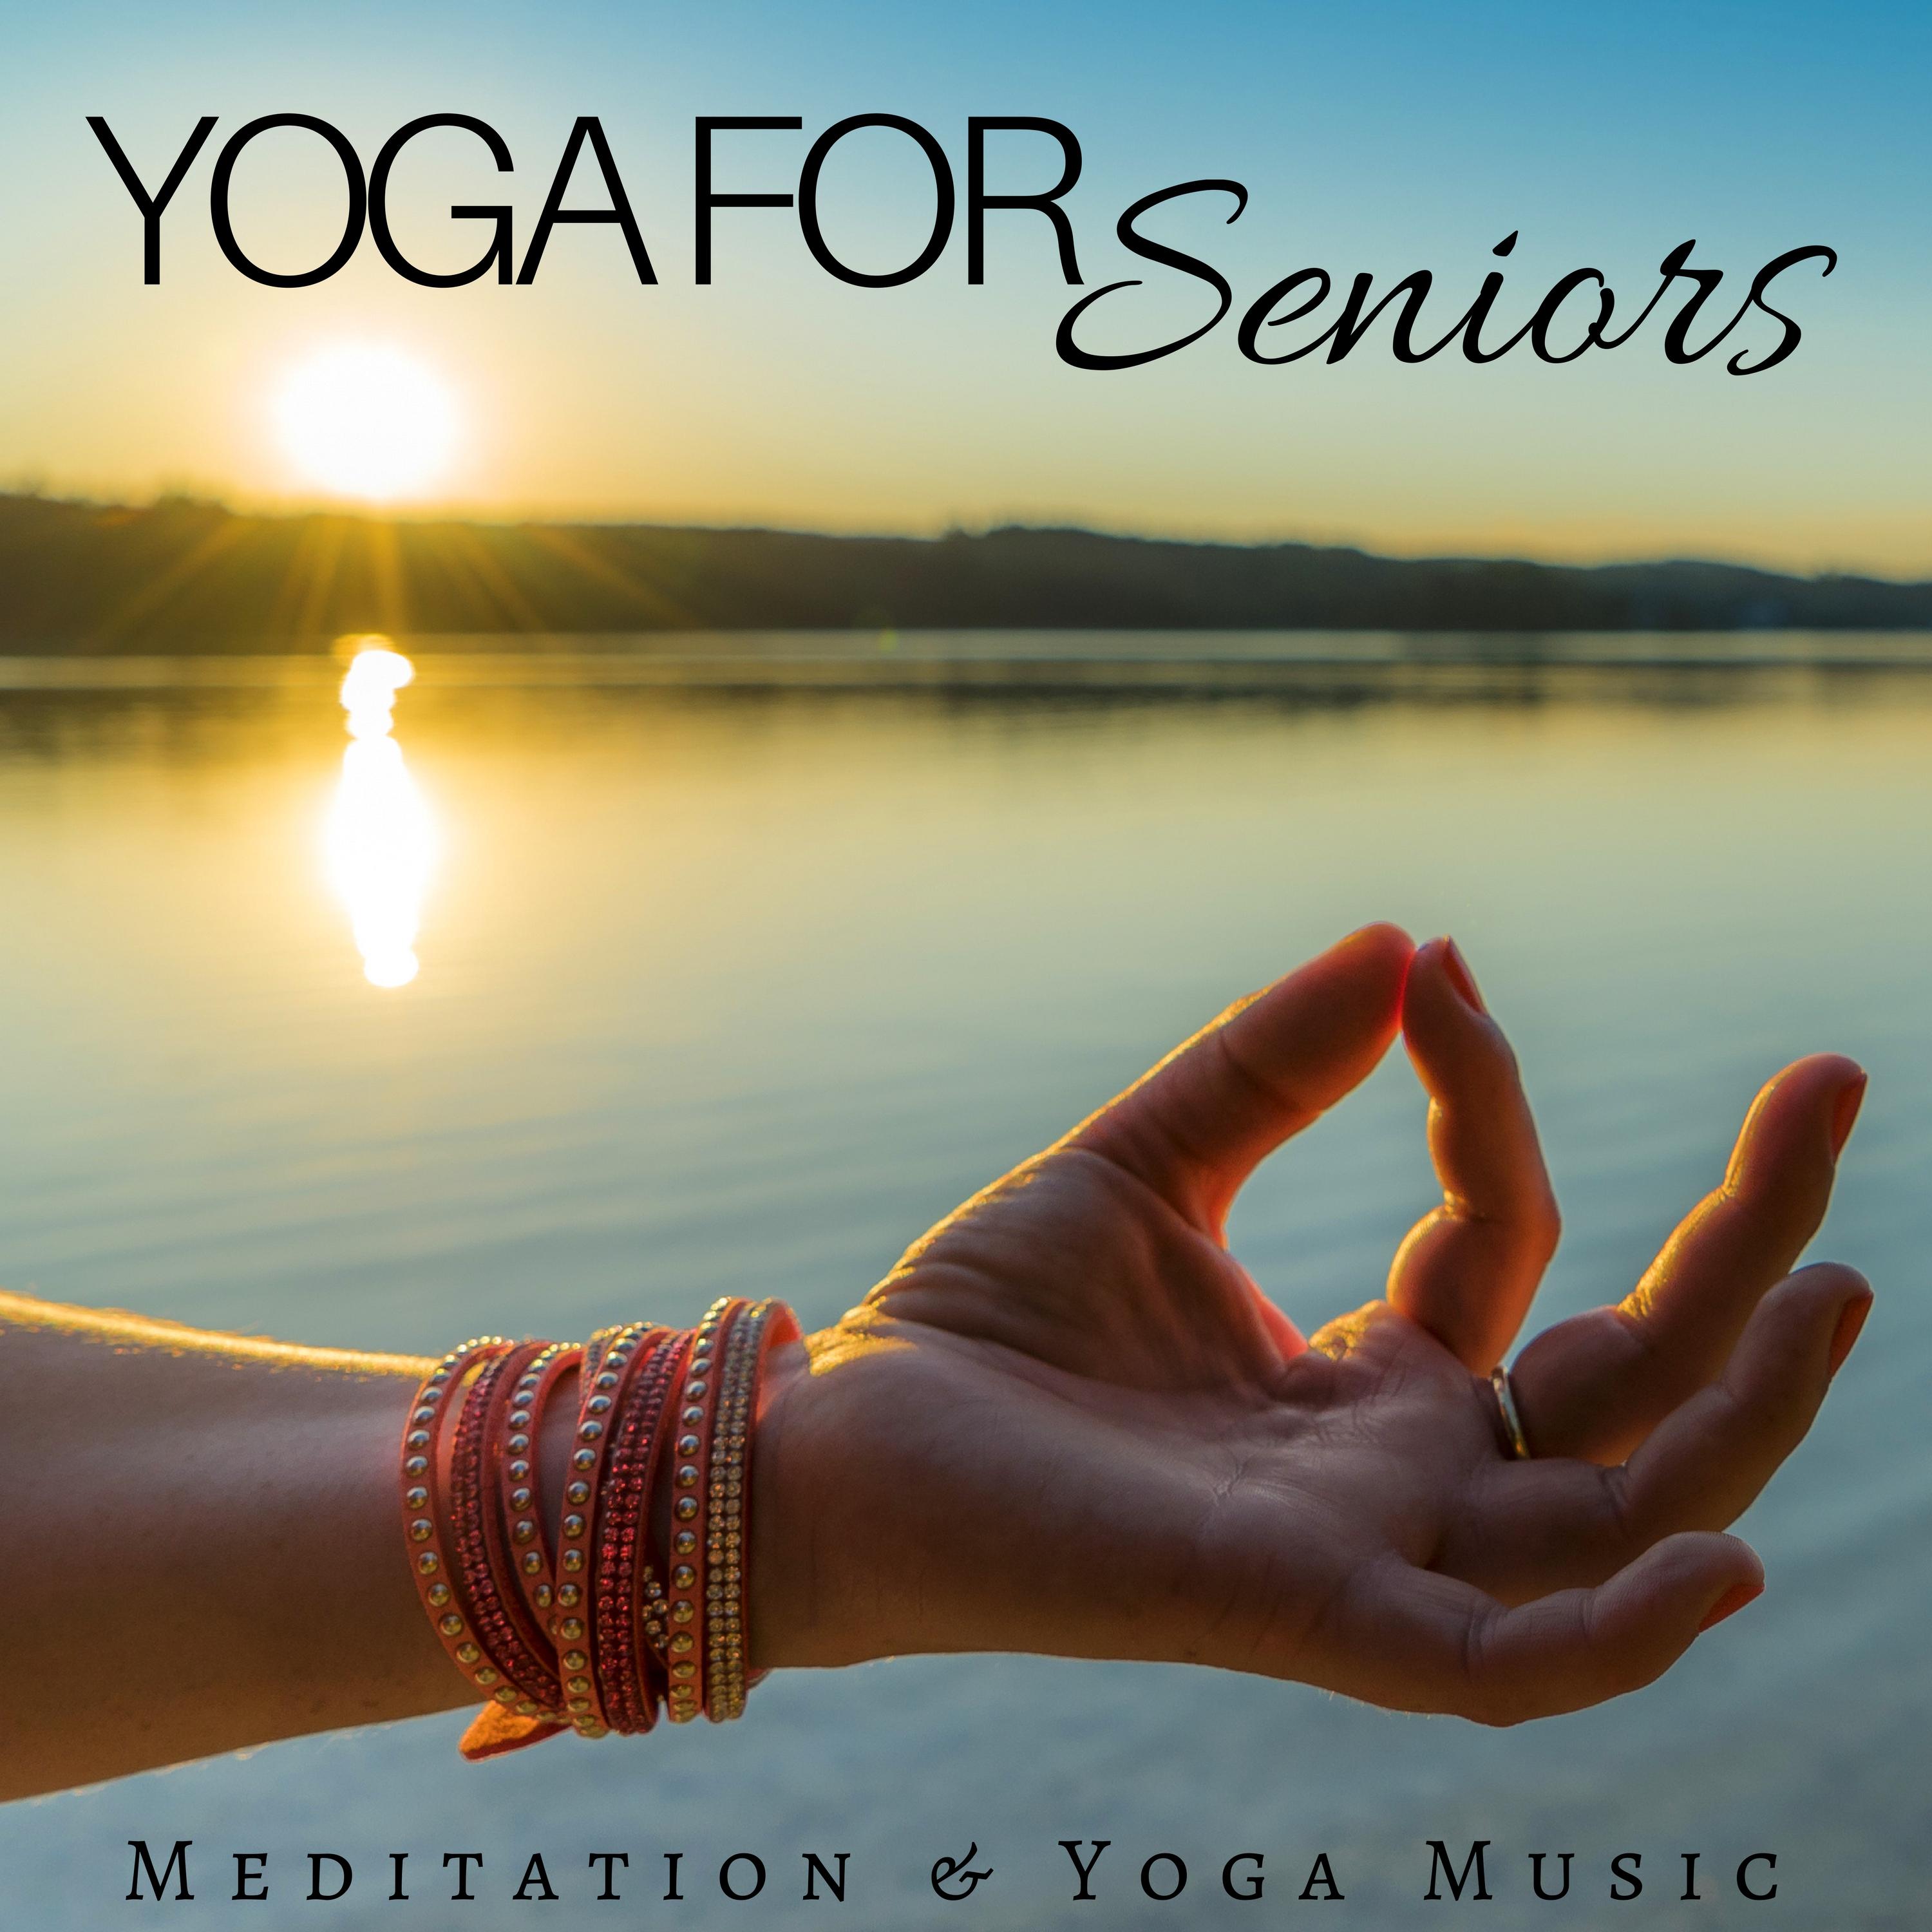 Yoga for Seniors: Meditation & Yoga Music for Adults, Relaxation and Peaceful Music for Yoga Class